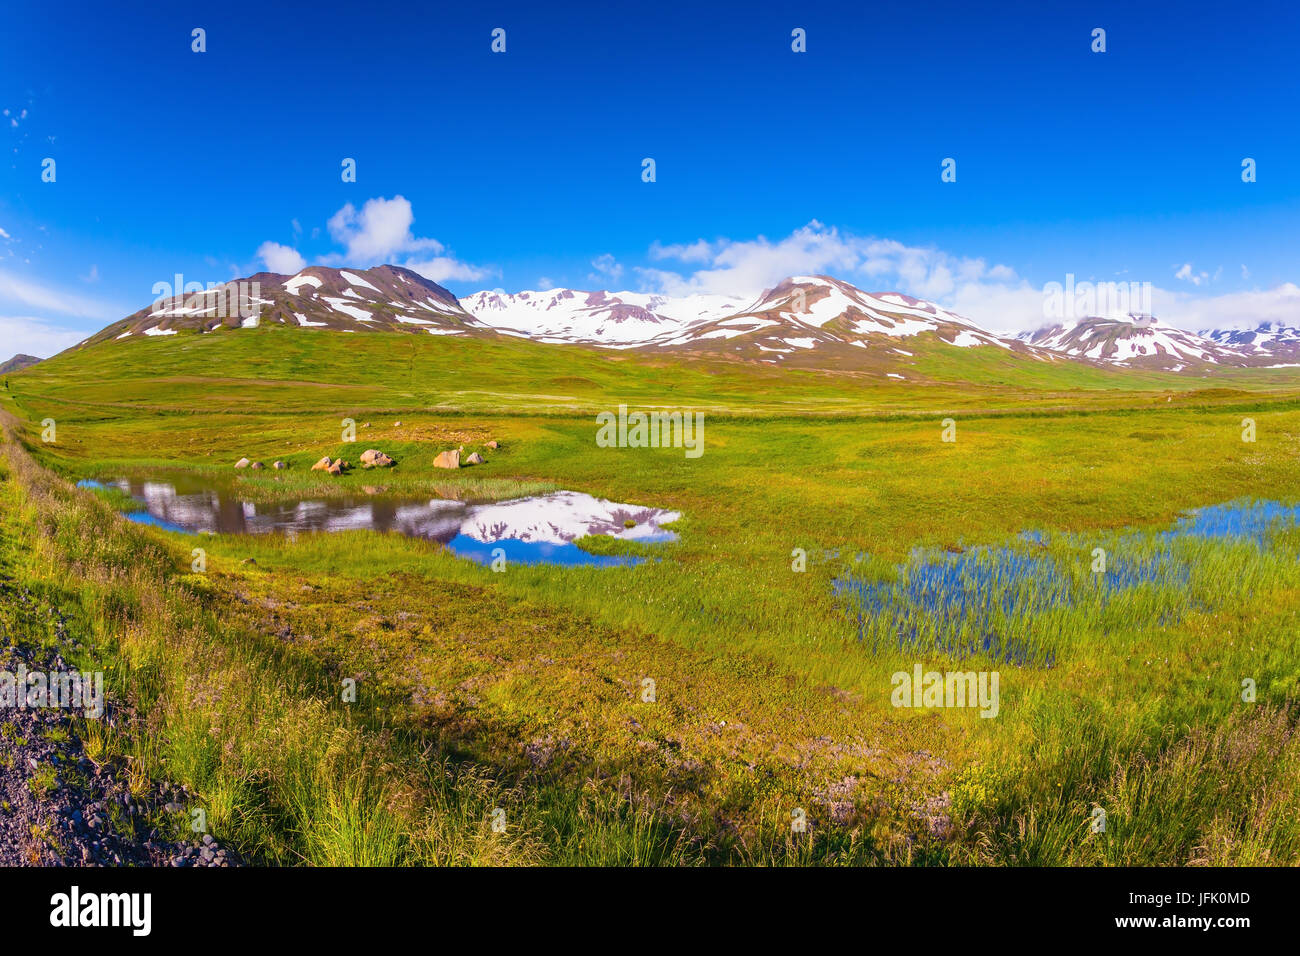 Summer Iceland. Blue lake water reflects snow hills Stock Photo